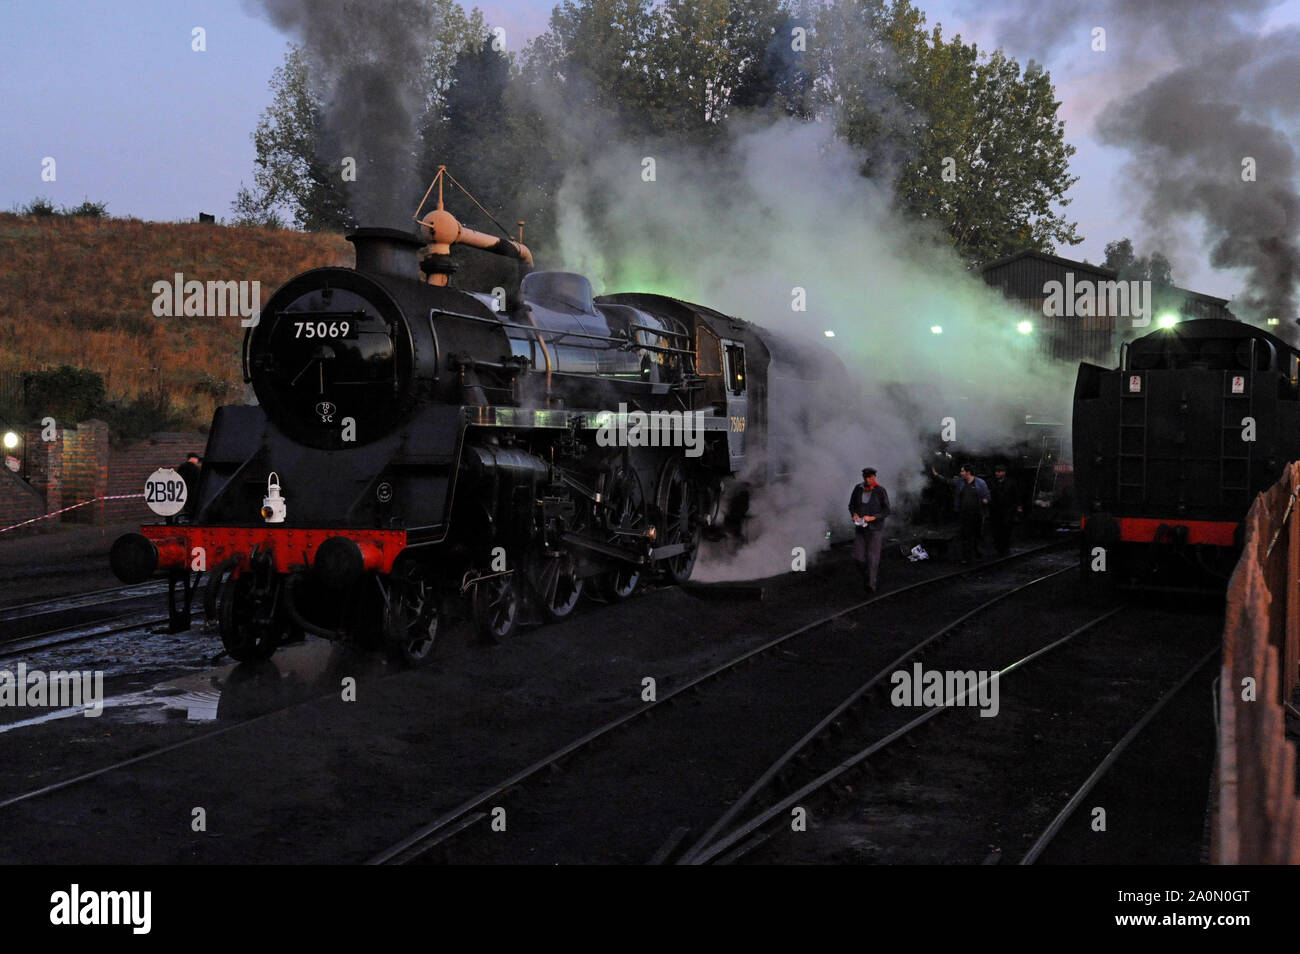 Bridgnorth, Shropshire, UK. 21 September 2019. Volunteer crews start at 4am to prepare steam engines for the UK's biggest steam gala, at The Severn Valley Railway. The event features up to 12 locomotives in steam and all night running along the 16 mile heritage railway. G.P. Essex / Alamy Live News Stock Photo